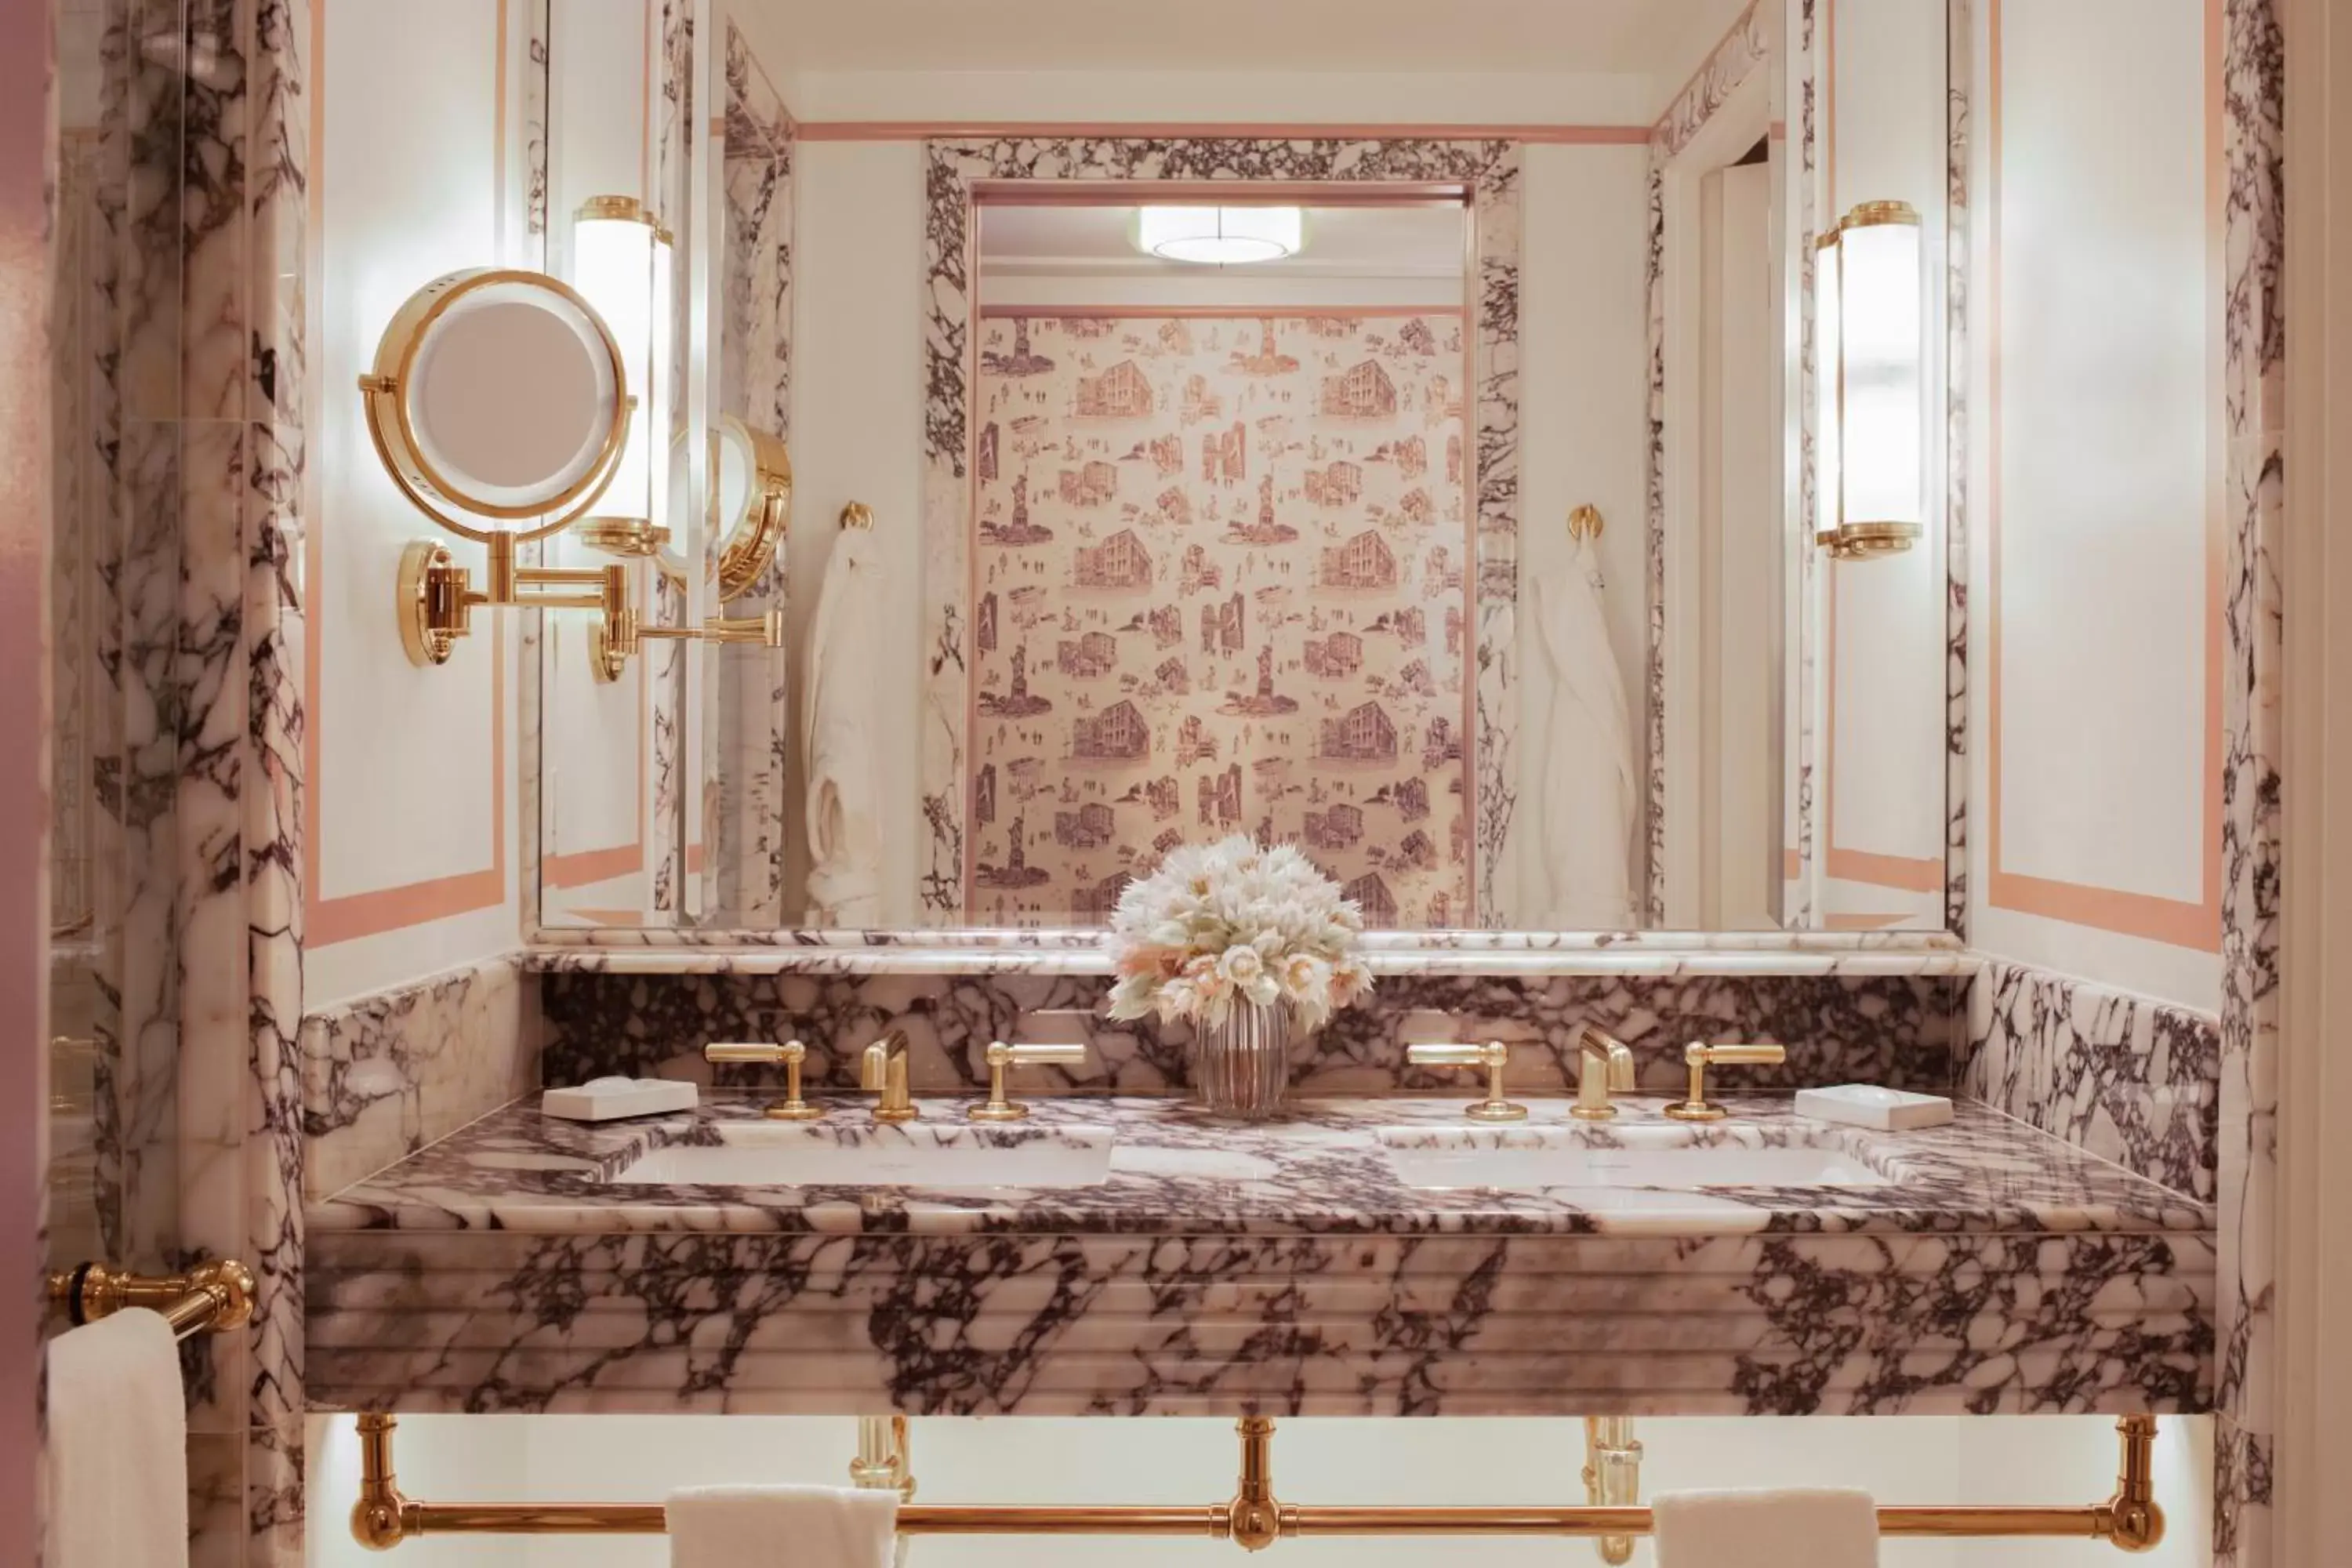 Bathroom, Banquet Facilities in Hotel Barrière Fouquet's New York